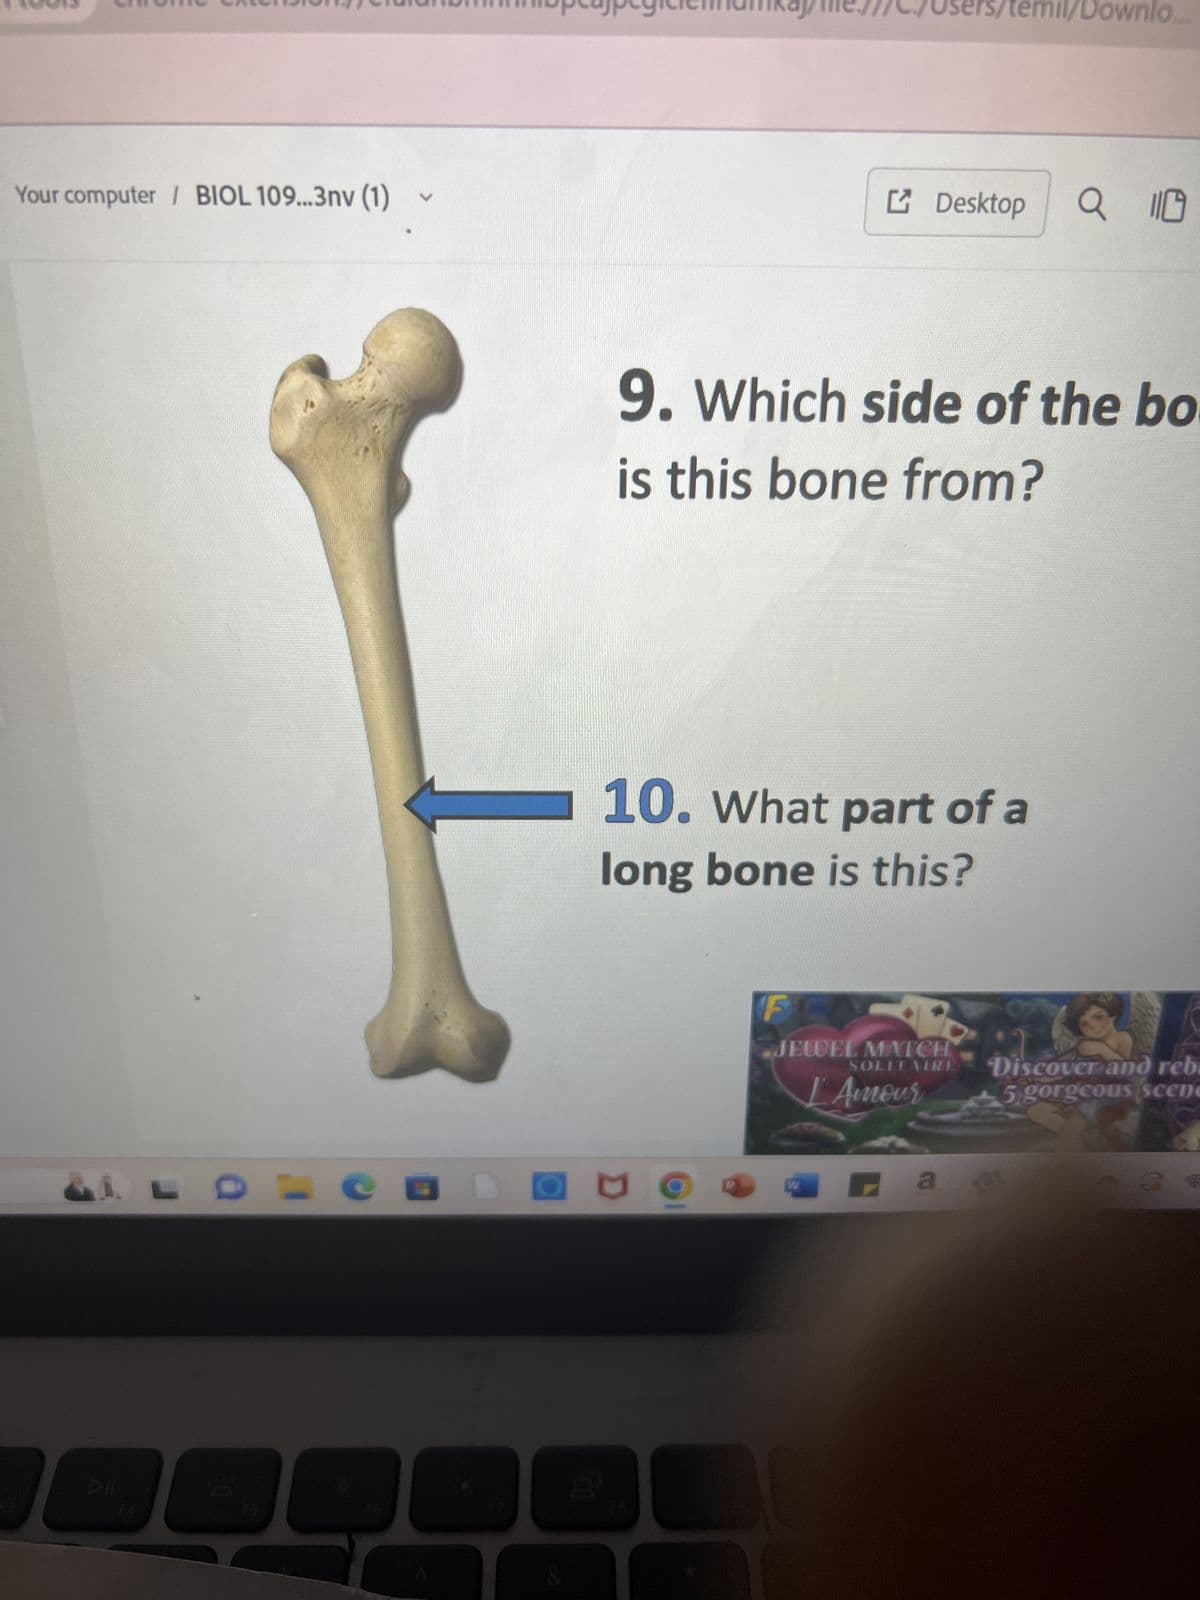 Your computer / BIOL 109...3nv (1)
20
e
V
D
8
9. Which side of the bo
is this bone from?
10. What part of a
long bone is this?
F
Desktop Q 110
JEWEL MATCH
SOLITAIRE
W
LAmour
emil/Downlo.
a
Discover and rebu
5 gorgeous scene
A
as
a